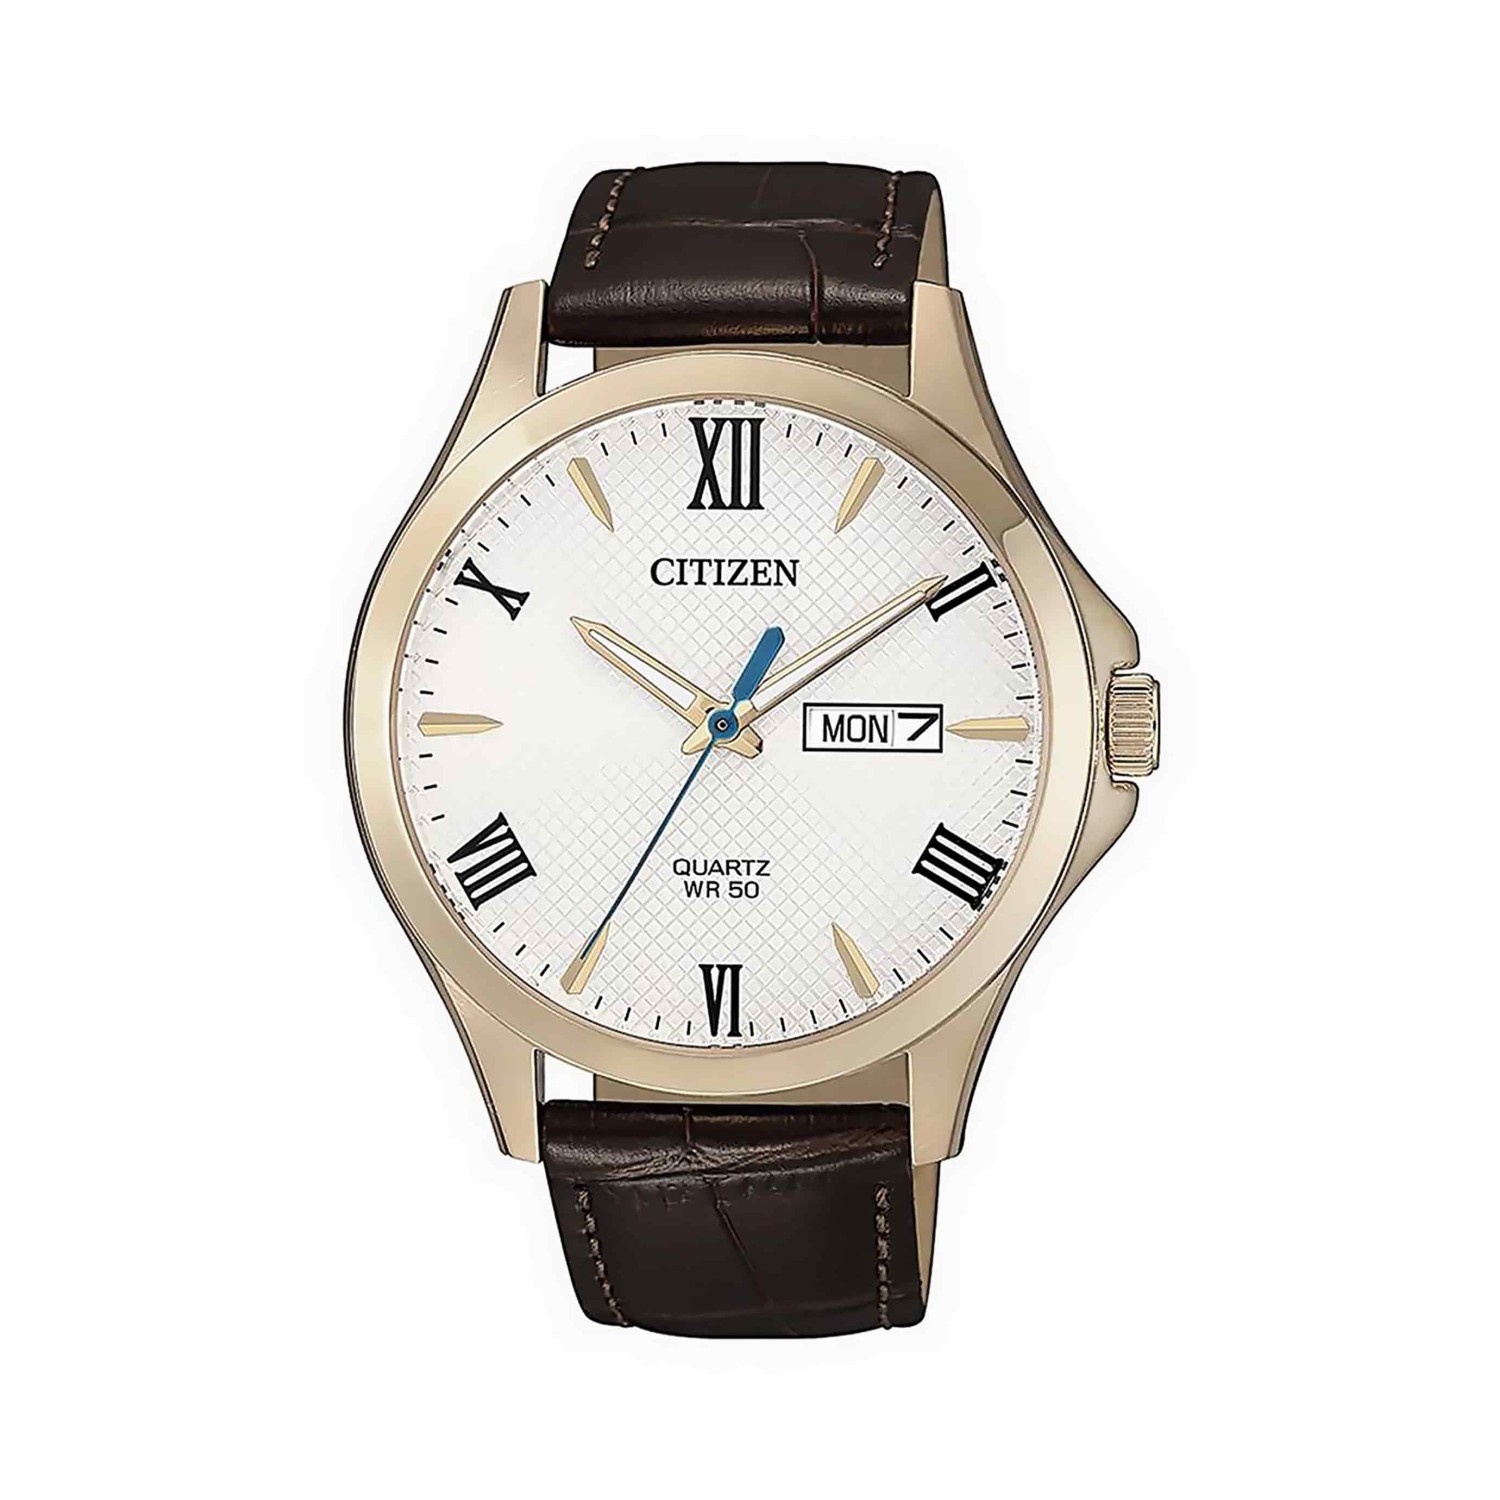 BF2023-01A Citizen Watch. With styled minimalism its signature, this watch from the Gents Dress Collection is designed to be a functionally effective timepiece for the modern man on the go. Dependable in the extreme, it features 3 year battery li @christi